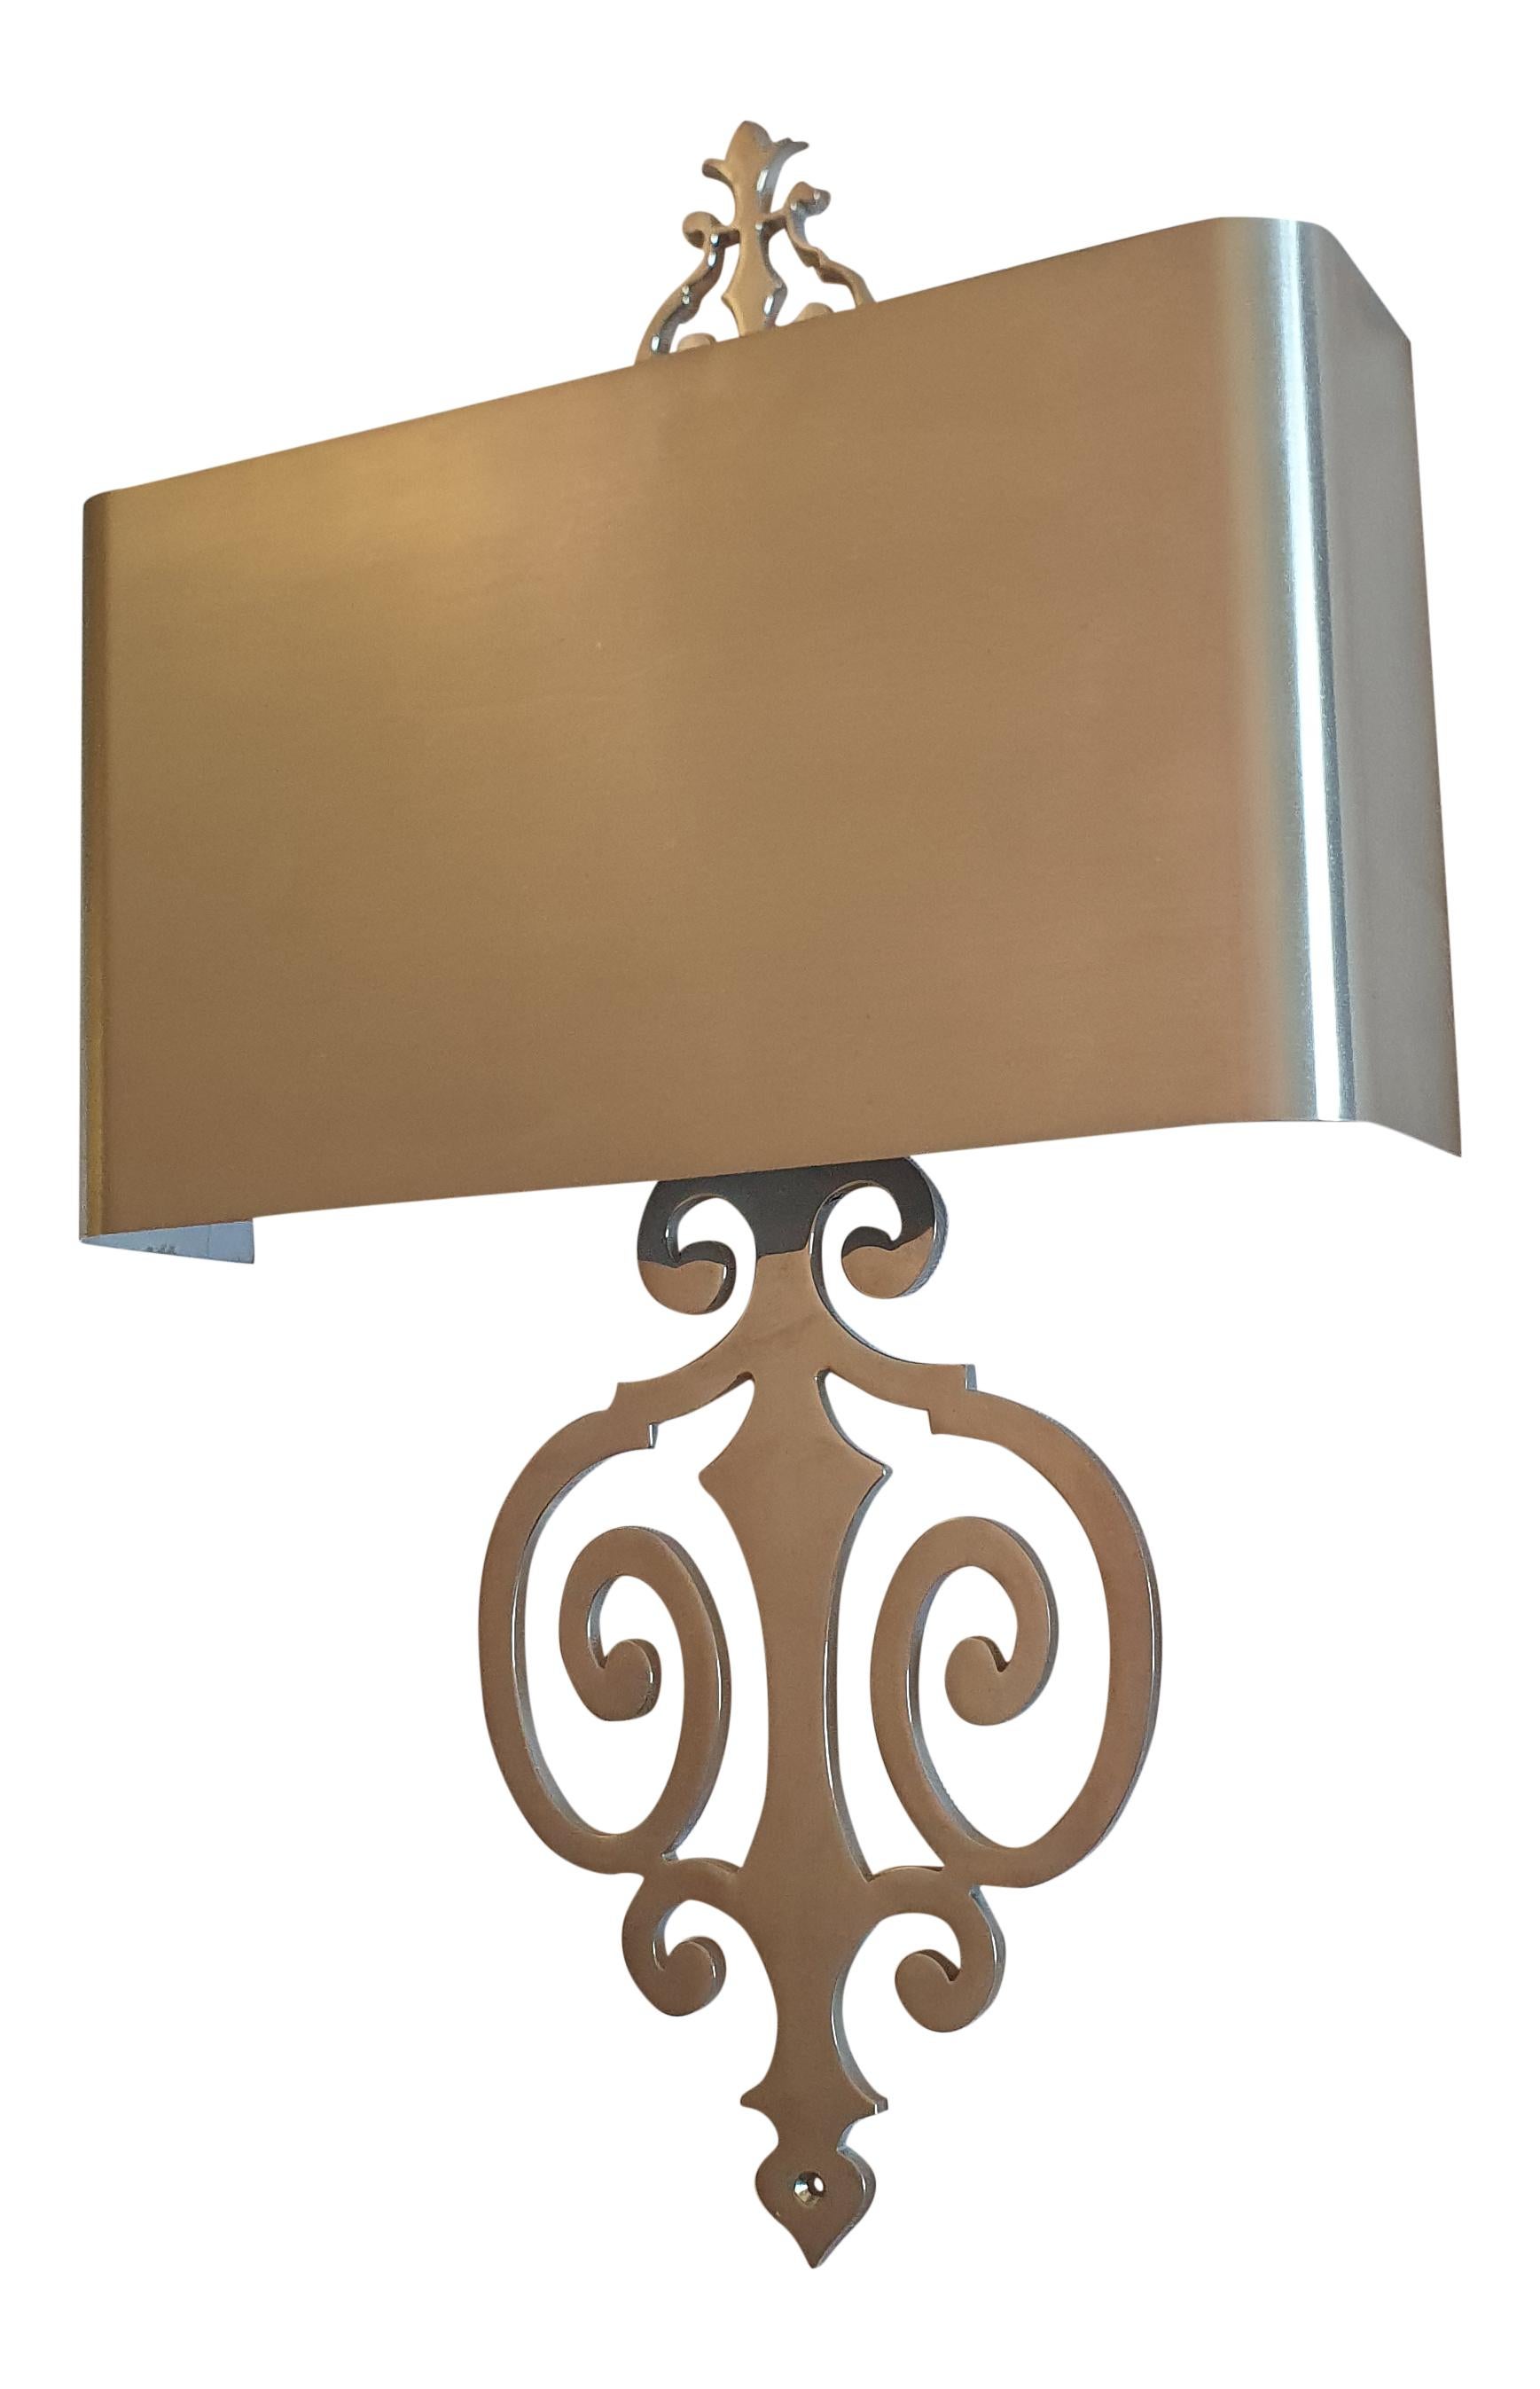 This stunning single Rinceaux wall sconce by the renowned Maison Charles is a true classic by the famous lighting manufacturer and still a best seller today since the 1960s
Made of solid cast Bronze back plate using the sand casting technique and